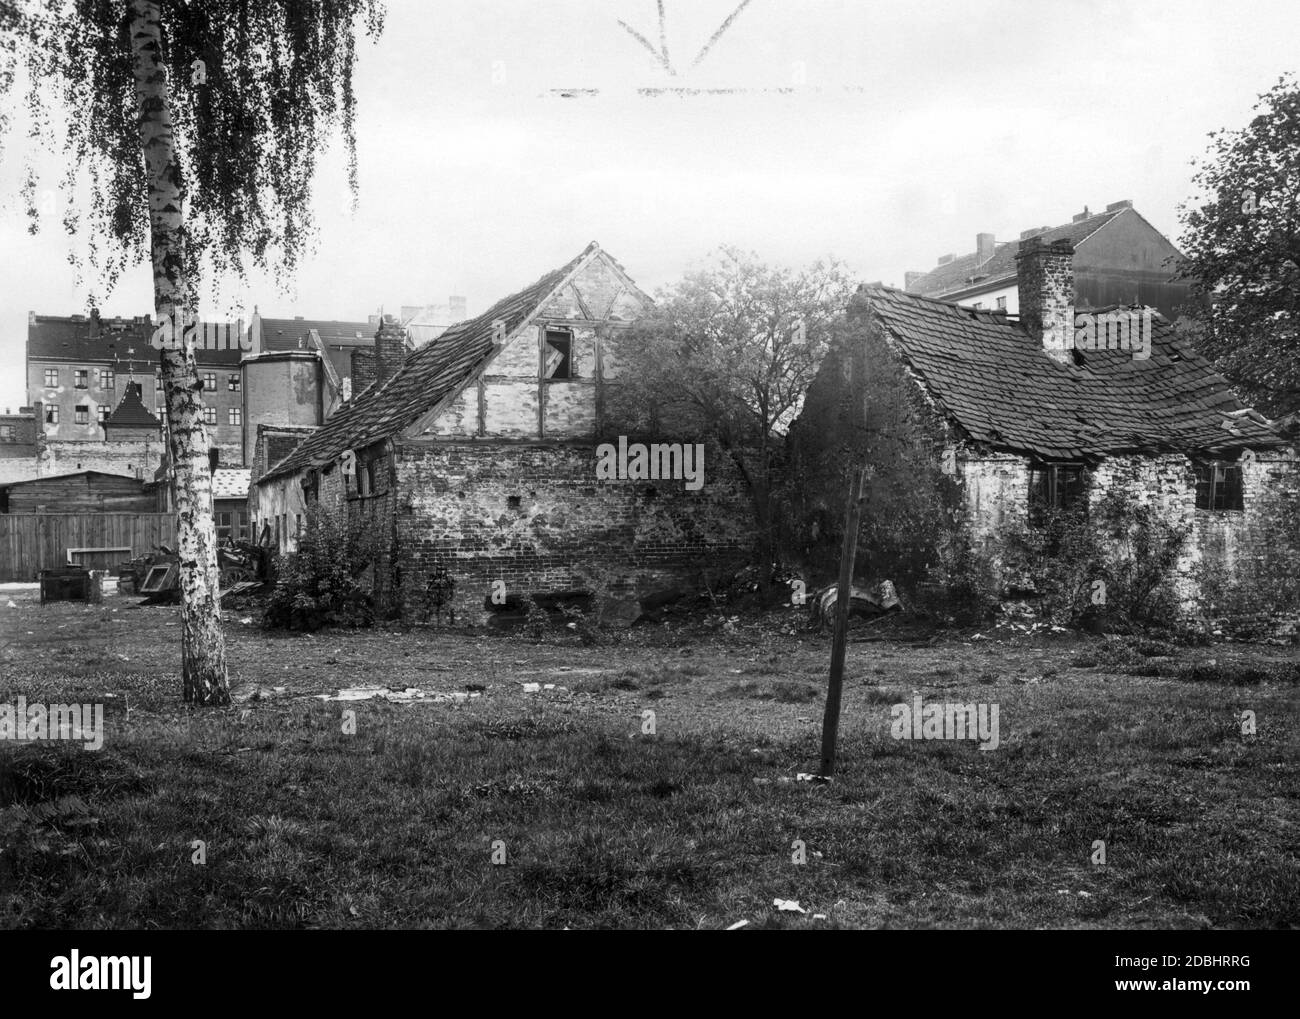 The 1932 photograph shows the rear view of a dilapidated barn and an abandoned stable of an old farm in Berlin at Muellerstrasse 16, behind which the more modern houses and tenements of the growing city already tower. Stock Photo